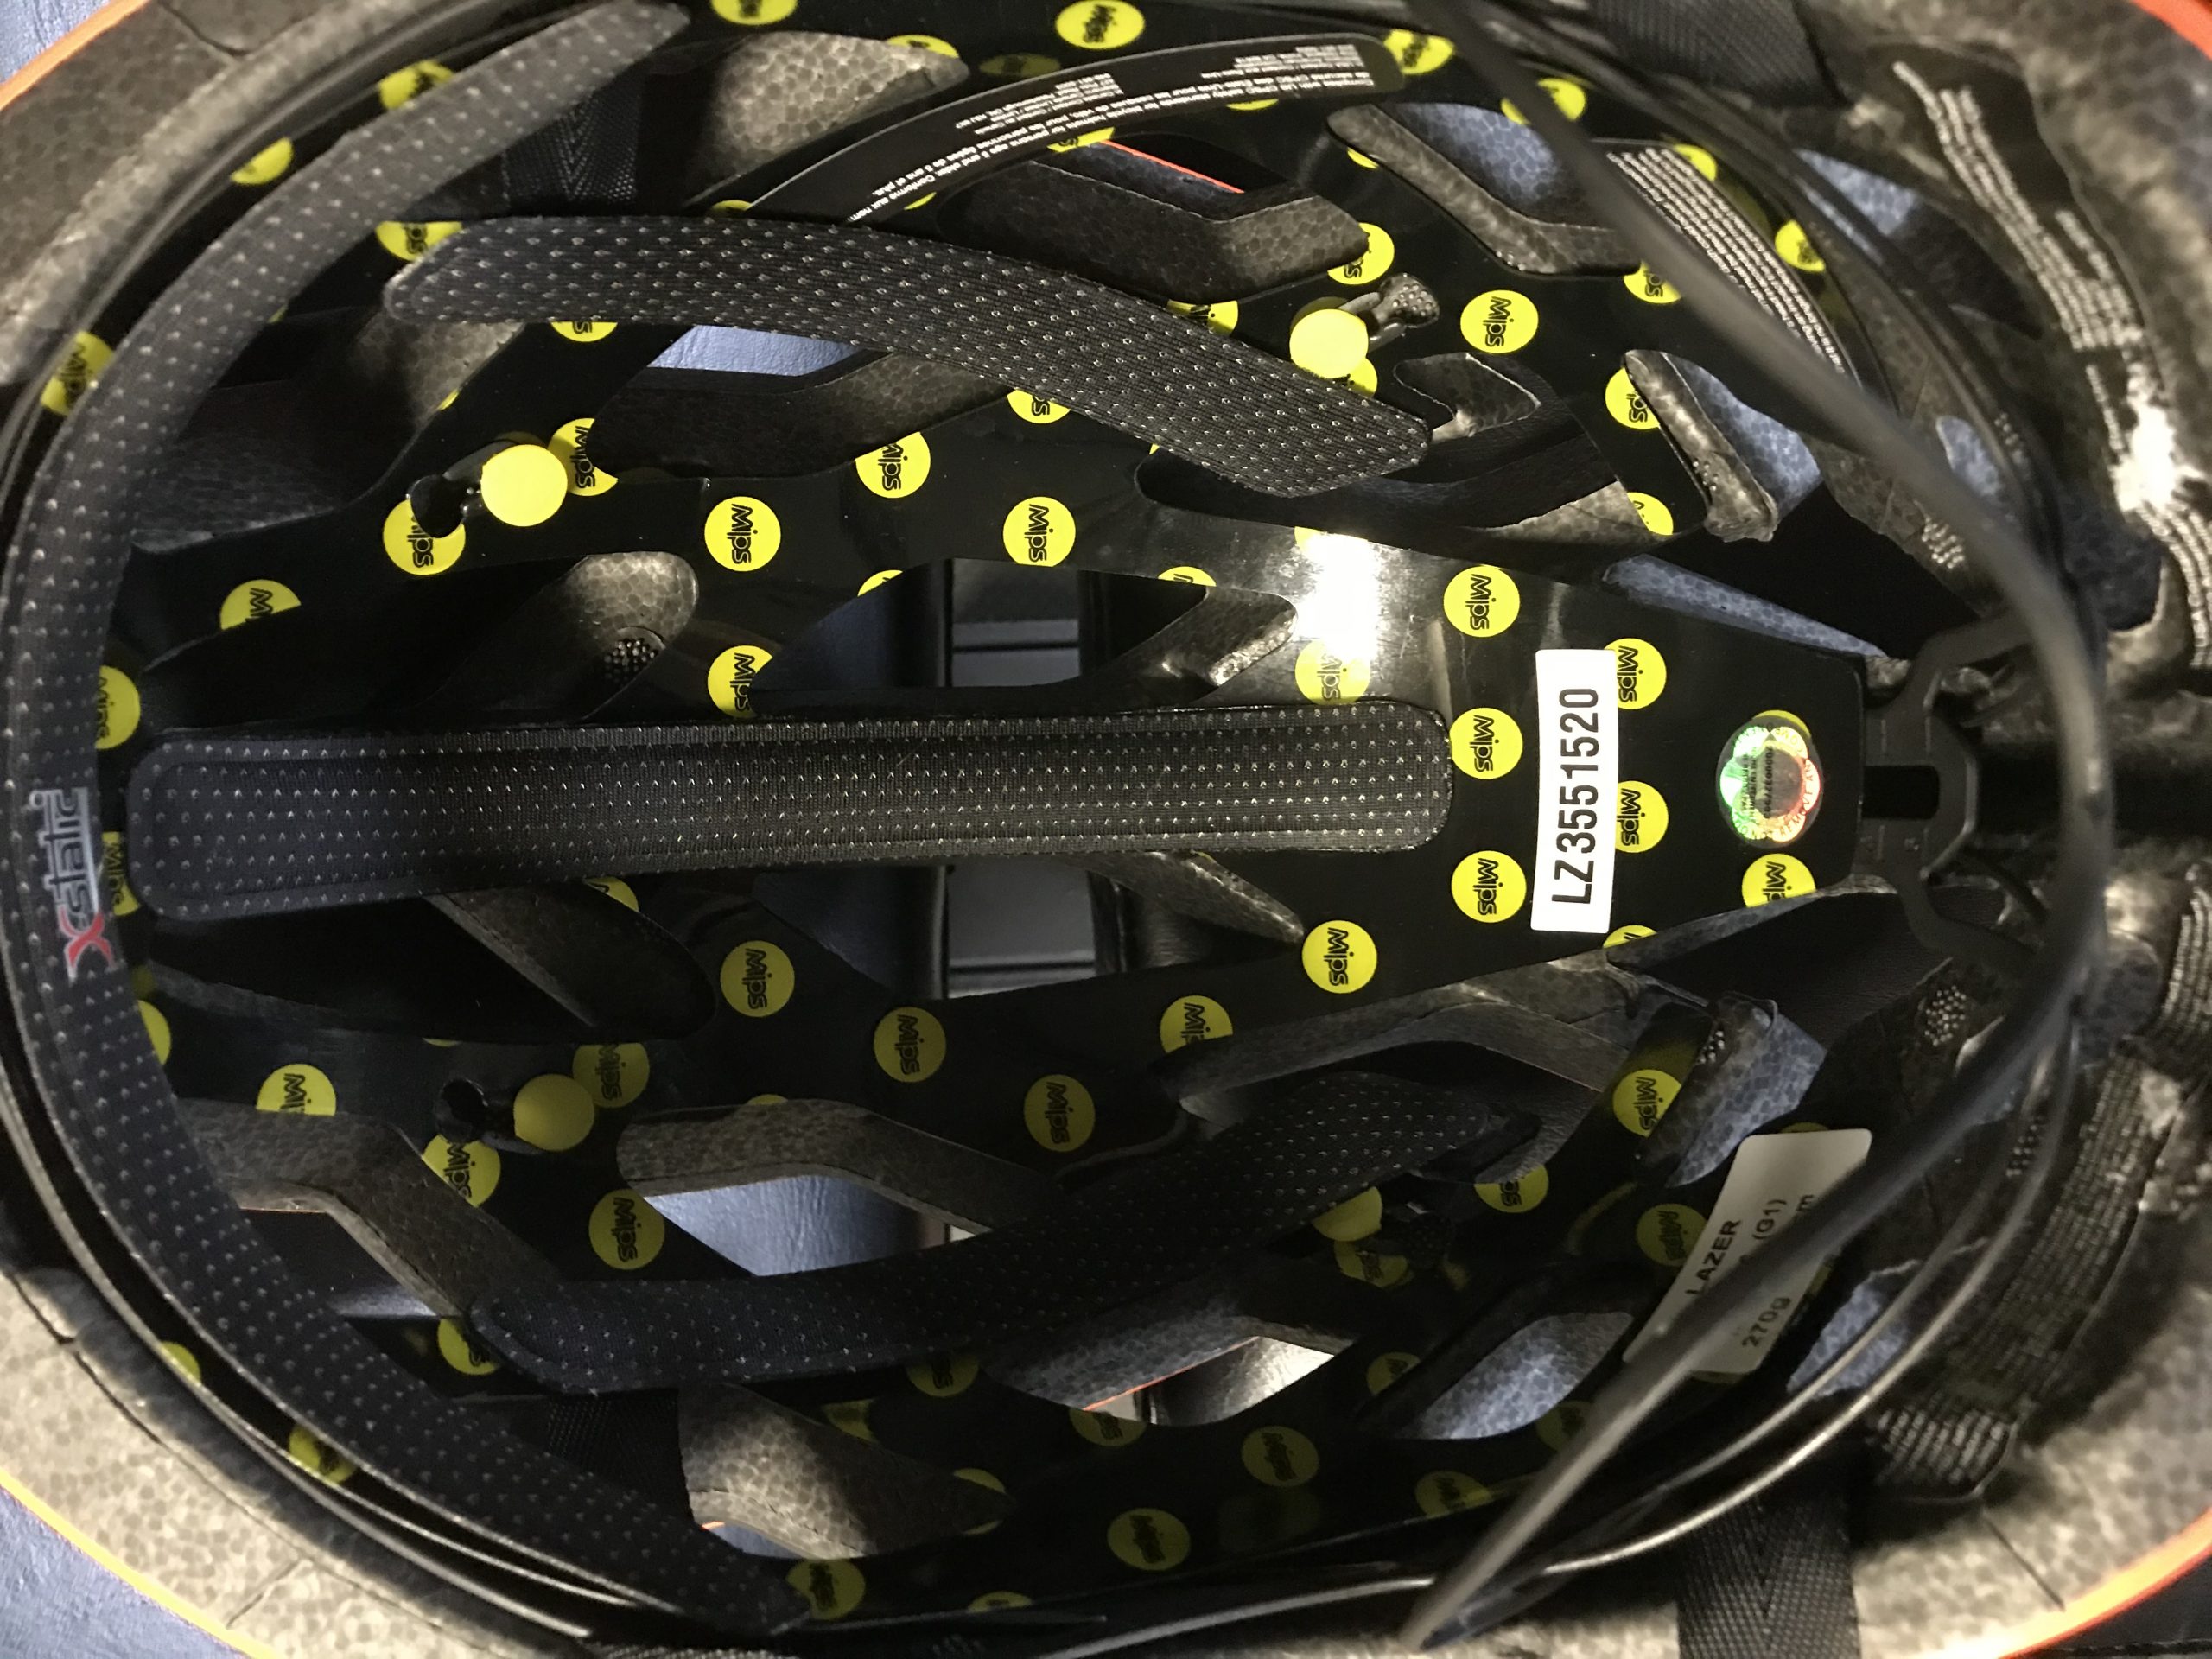 MIPS Found in many of the Best Road Bike Helmets